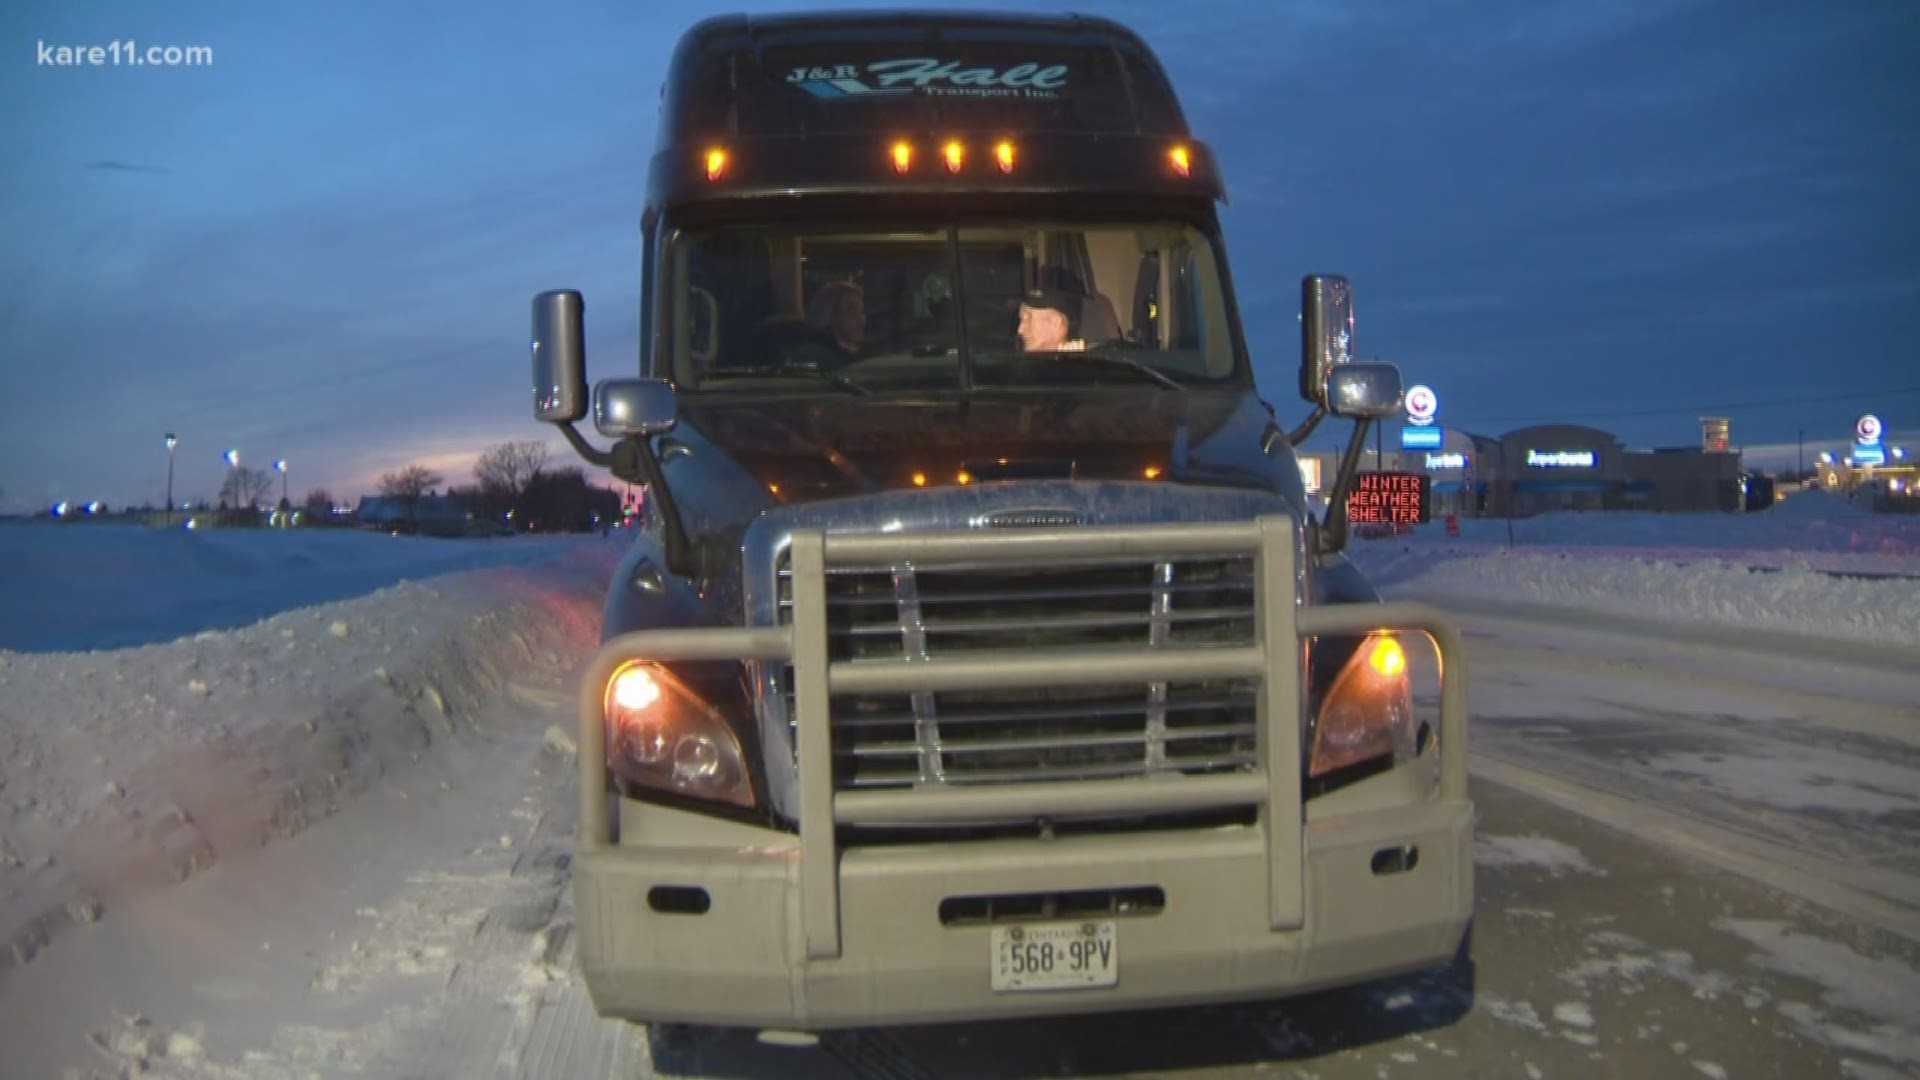 While plows work nonstop to clear the snow, the National Guard is rescuing stranded drivers.